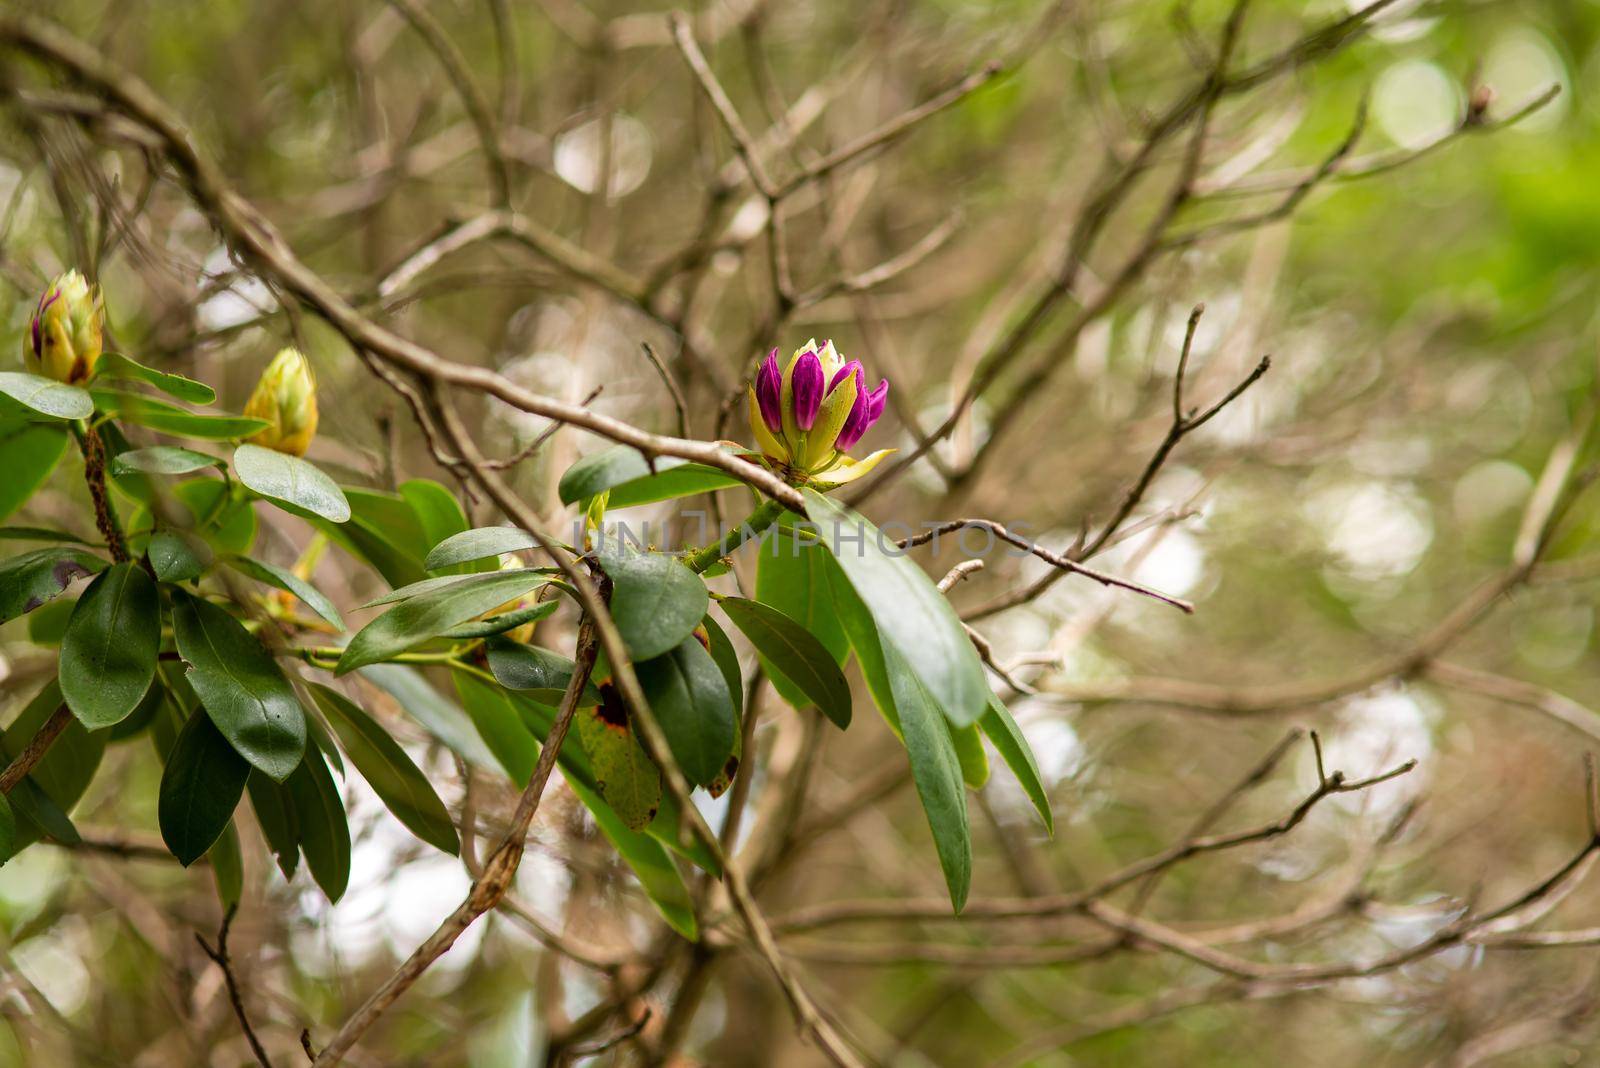 unblown purple rhododendron buds in the spring garden